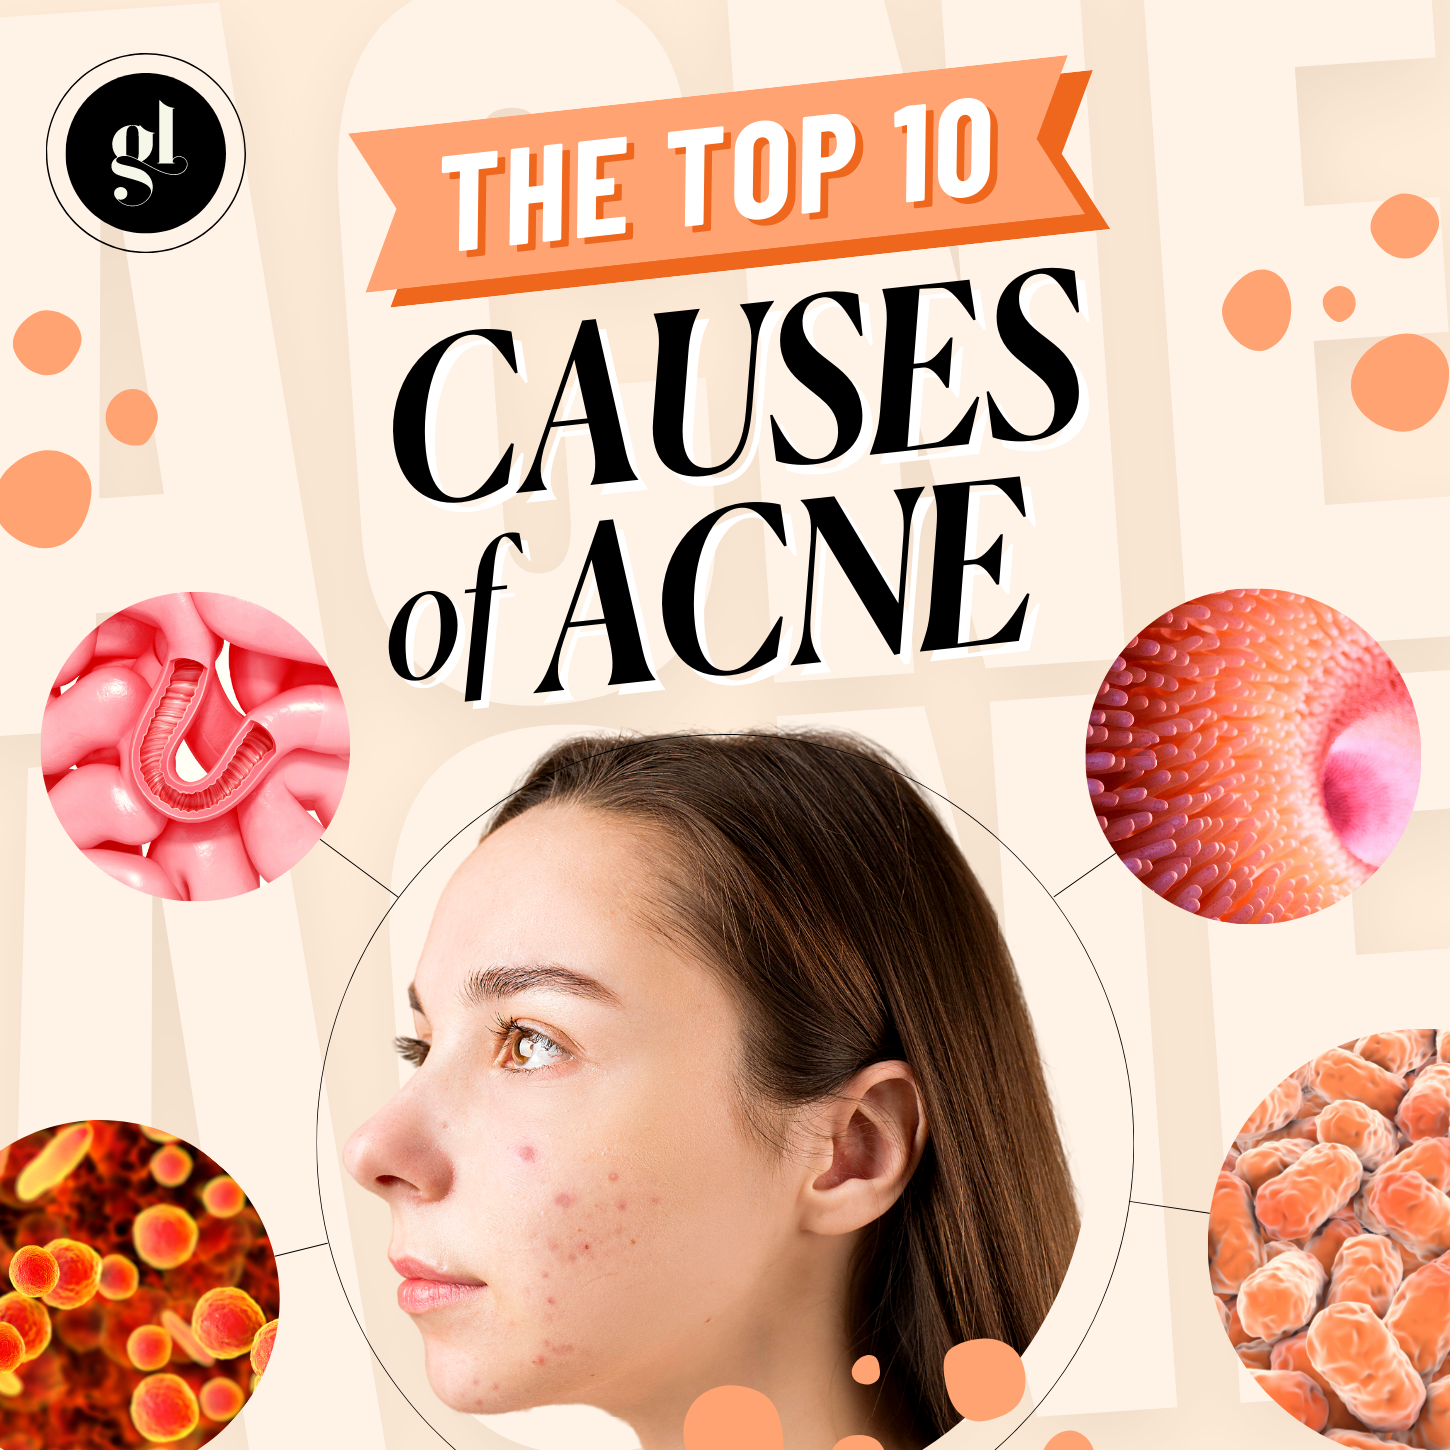 The Top 10 Causes of Acne